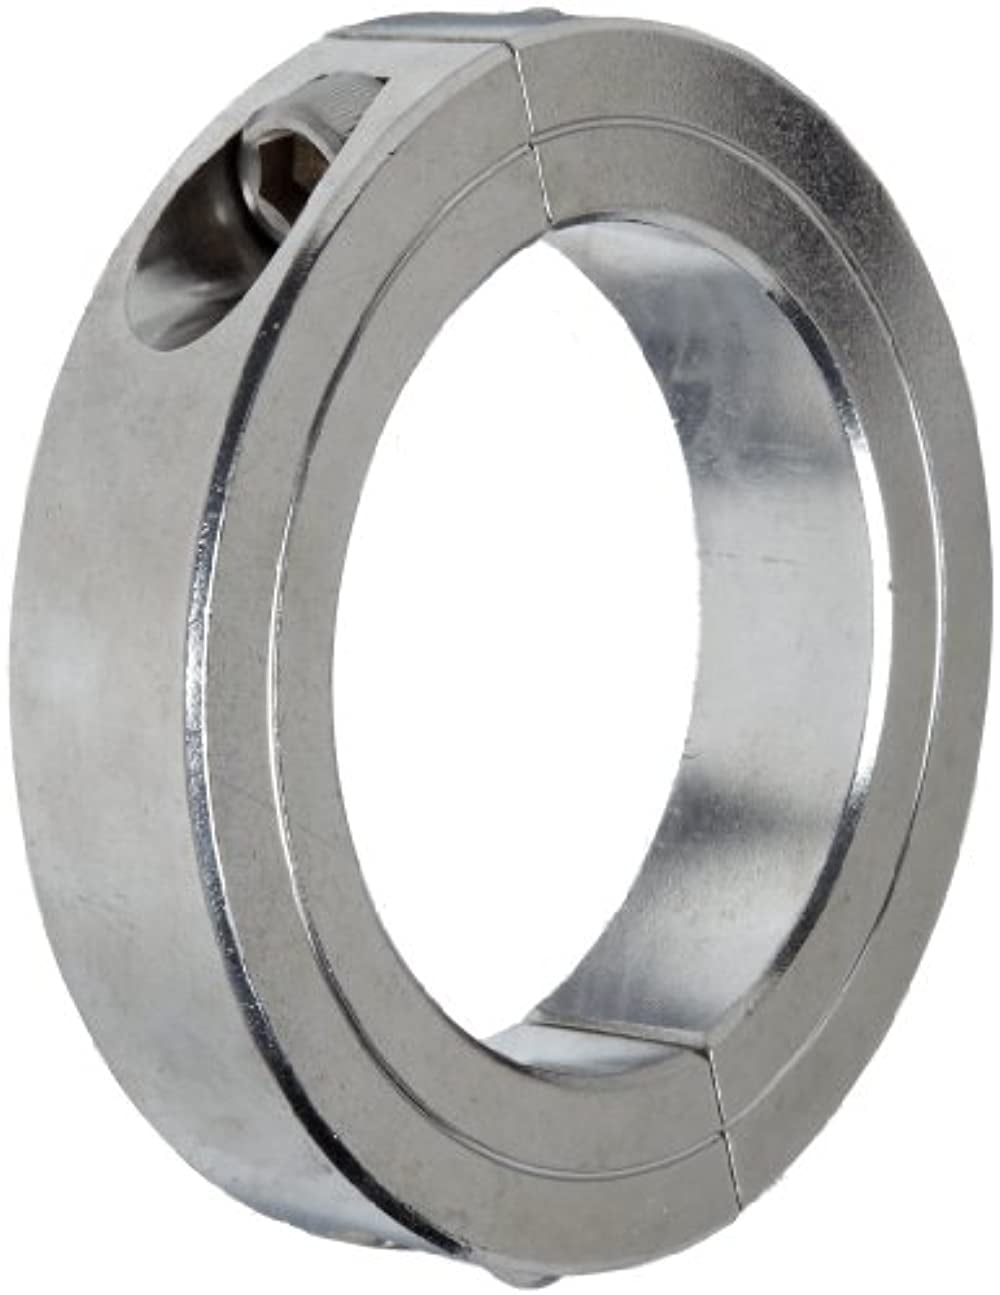 Whittet-Higins CC-04A Lightweight Clamping Shaft Collar Self-Locking 0.250 Bore Replaces Climax 1C-025-A 7A004, Stafford 1A004 Ruland CL-4-A H1C-025-A 